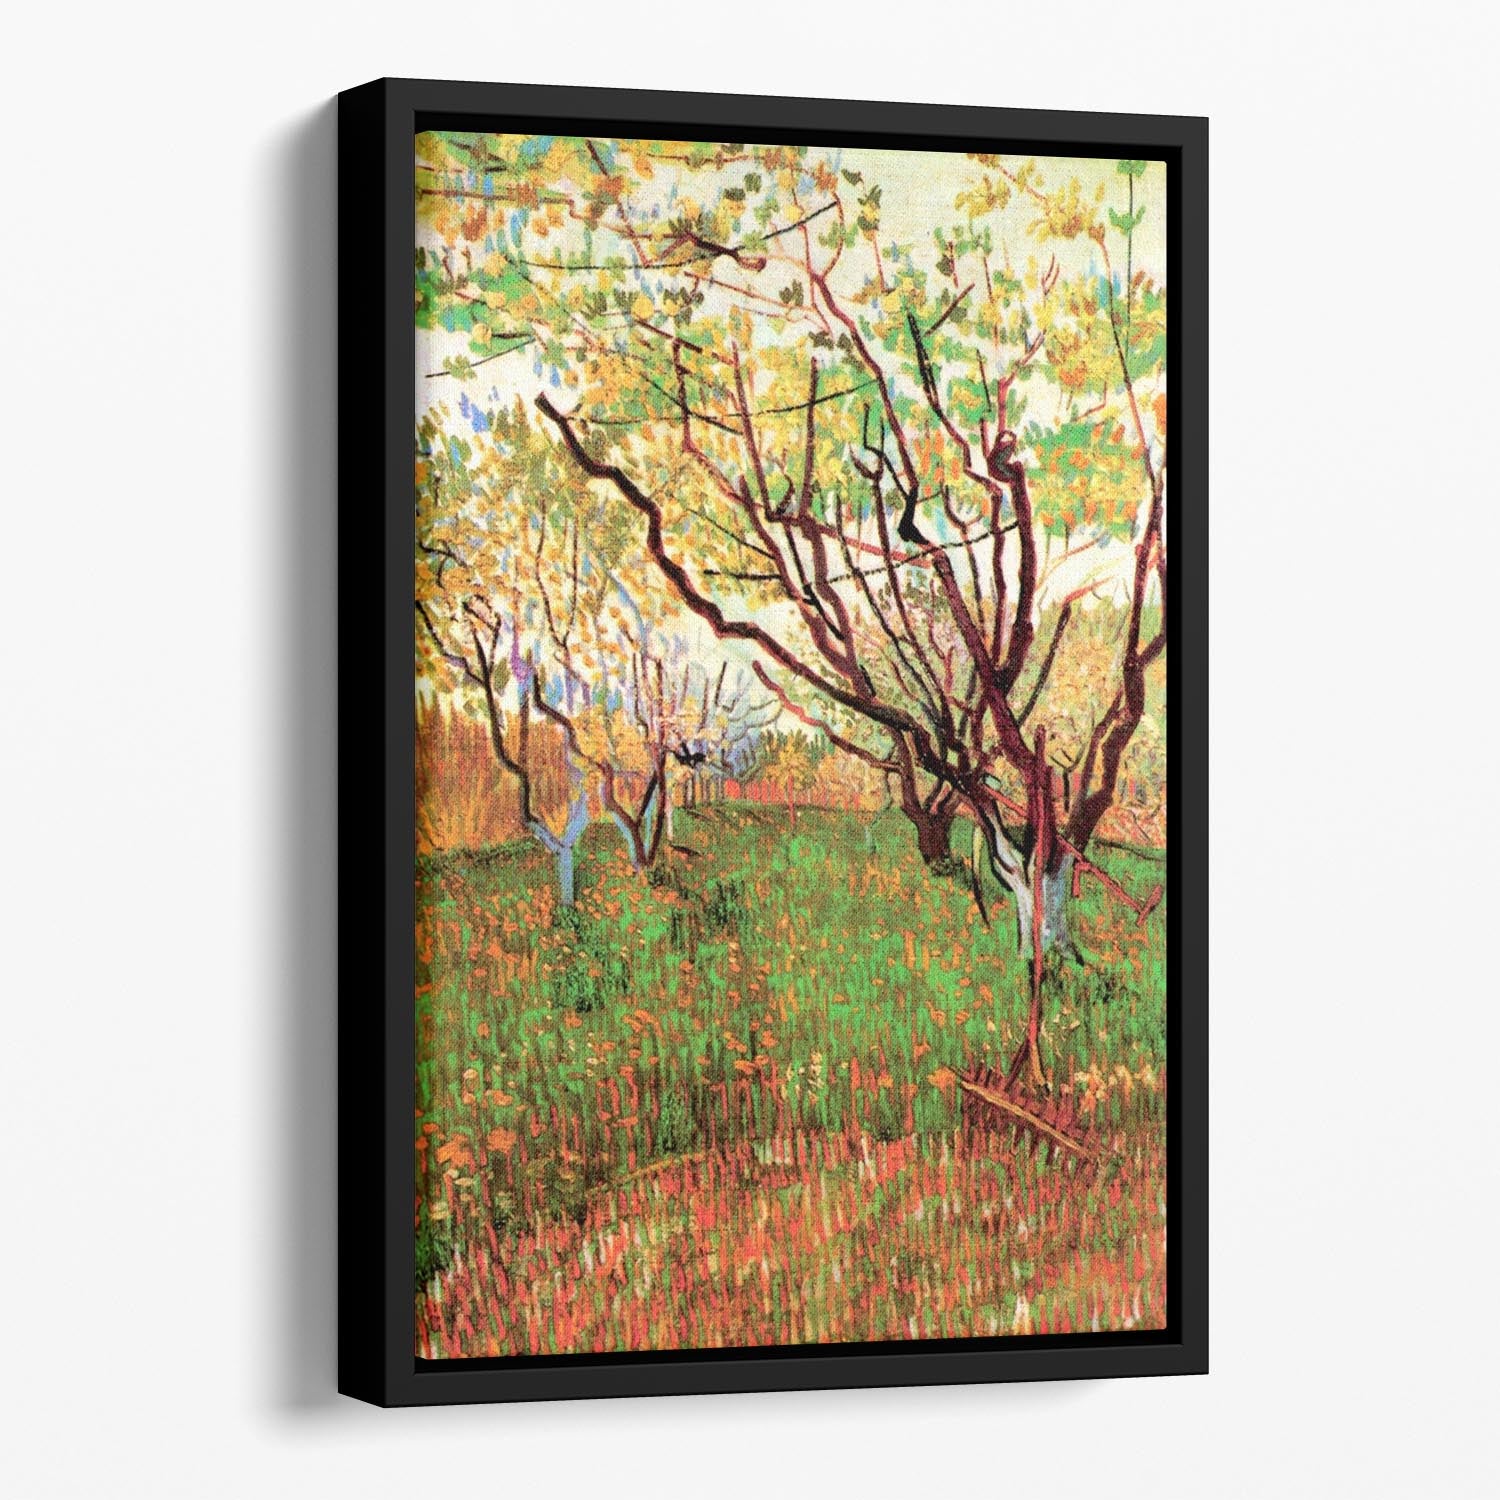 Orchard in Blossom by Van Gogh Floating Framed Canvas